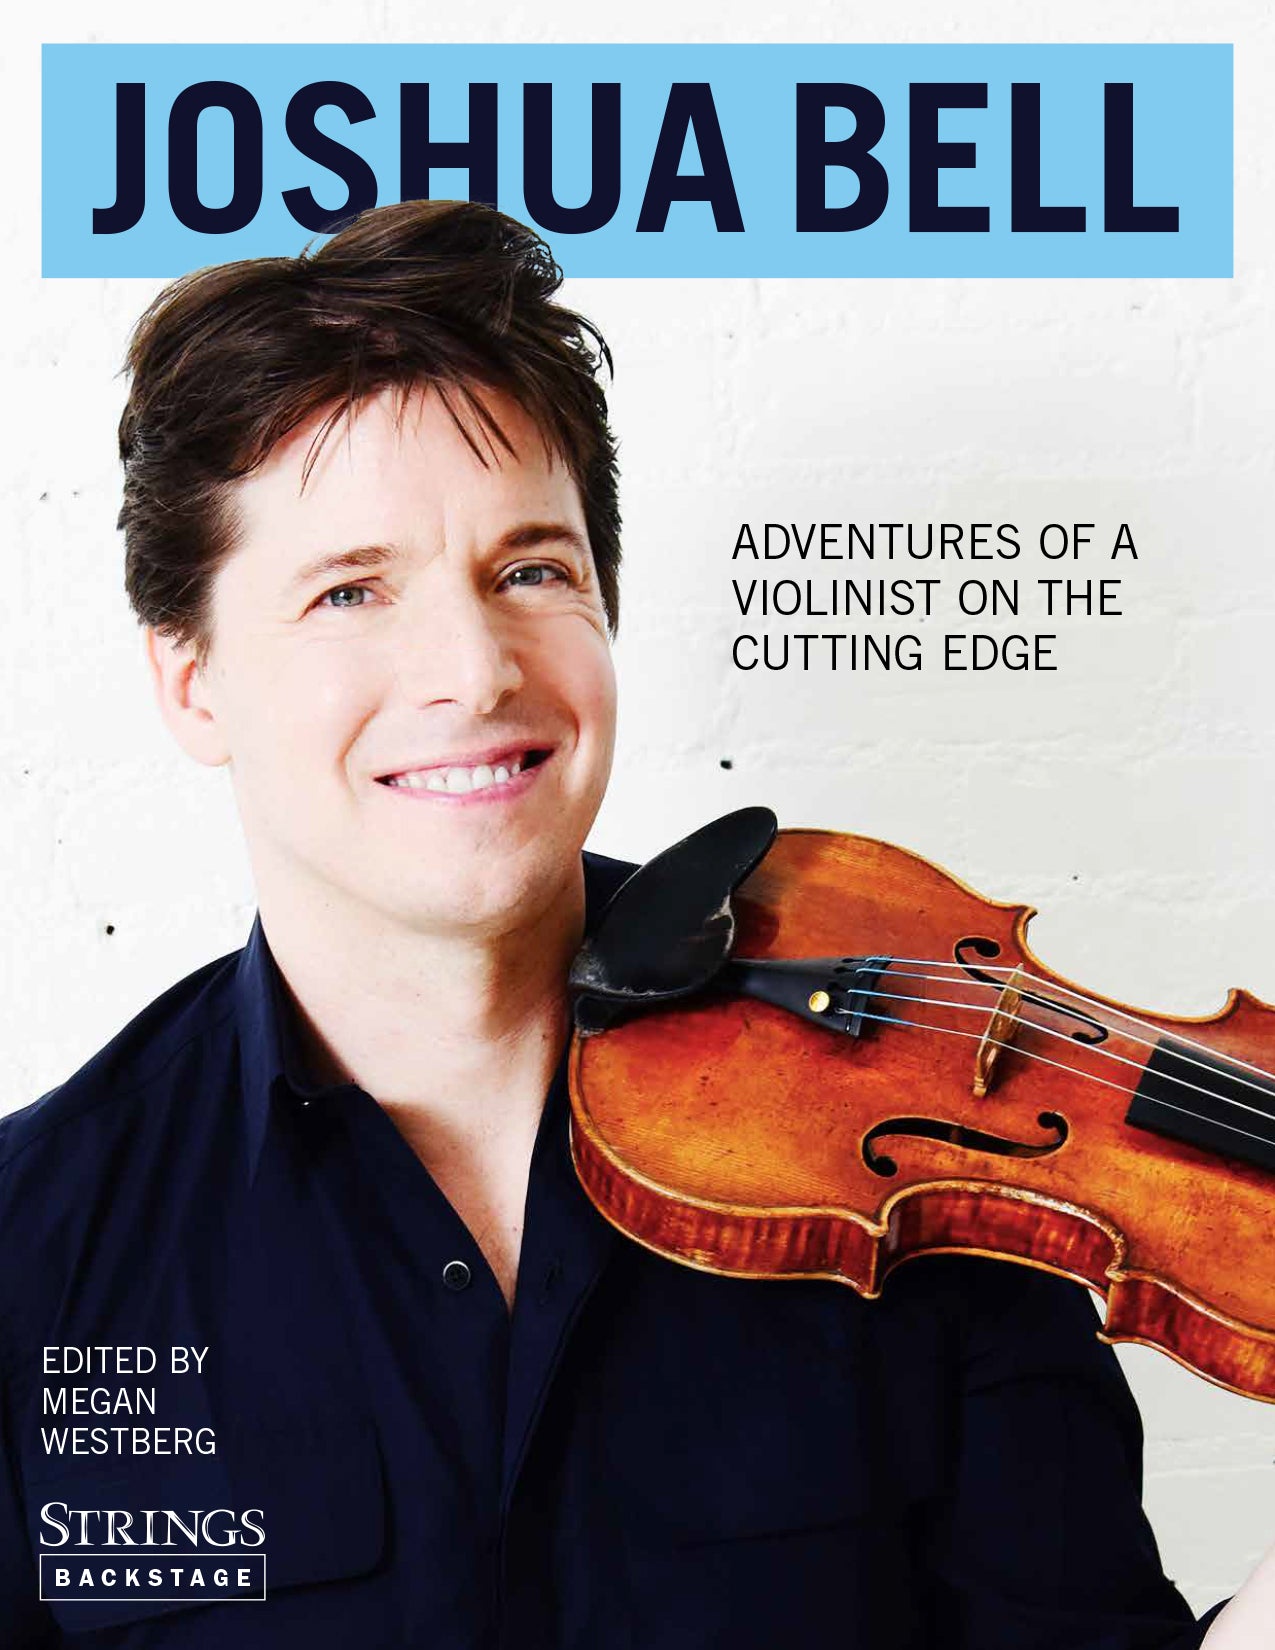 Joshua Bell: Adventures of a Violinist on the Cutting Edge